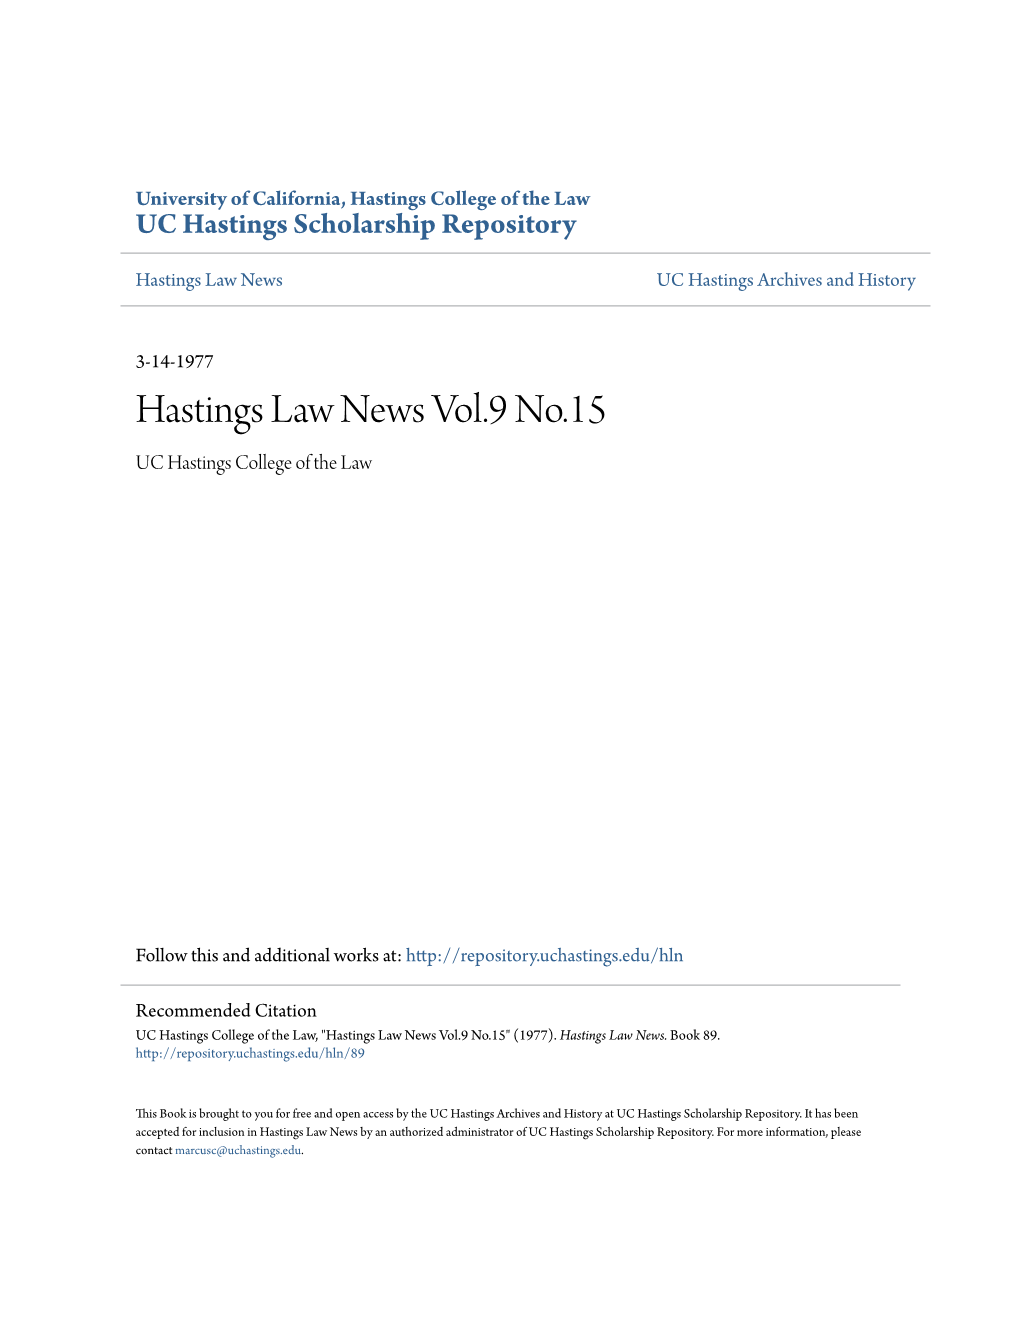 Hastings Law News Vol.9 No.15 UC Hastings College of the Law